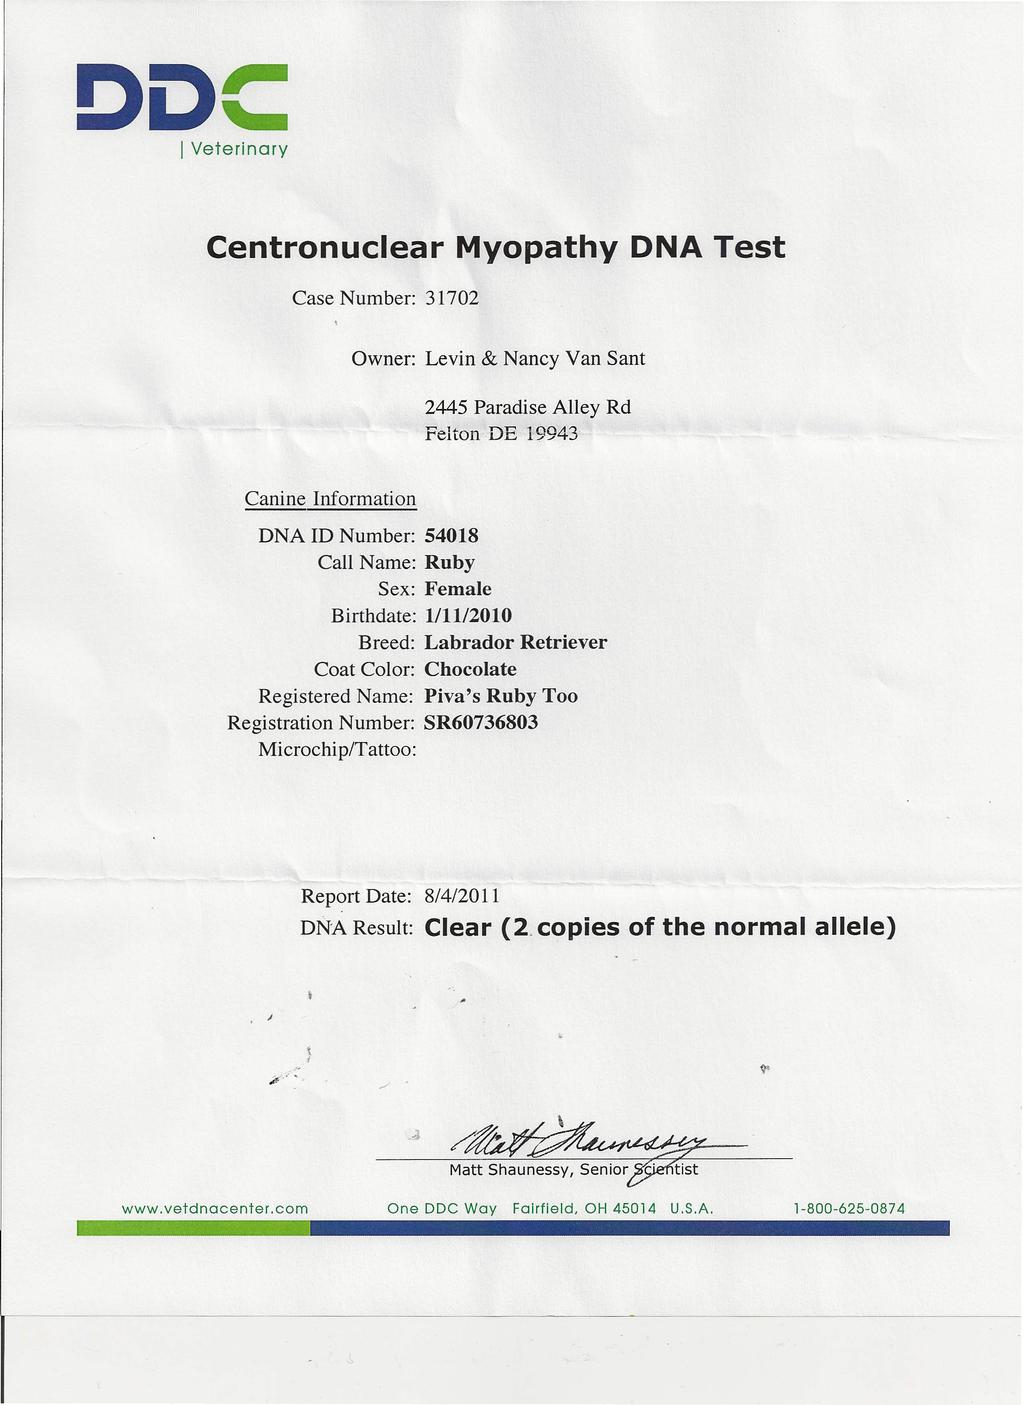 DOC I Veterinary Centronuclear Myopathy DNA Test Case Number: 31702 Owner: Levin & Nancy Van Sant 2445 Paradise Alley Rd Felton DE 19943 Canine Information DNA ID Number: 54018 Call Name: Ruby Sex: